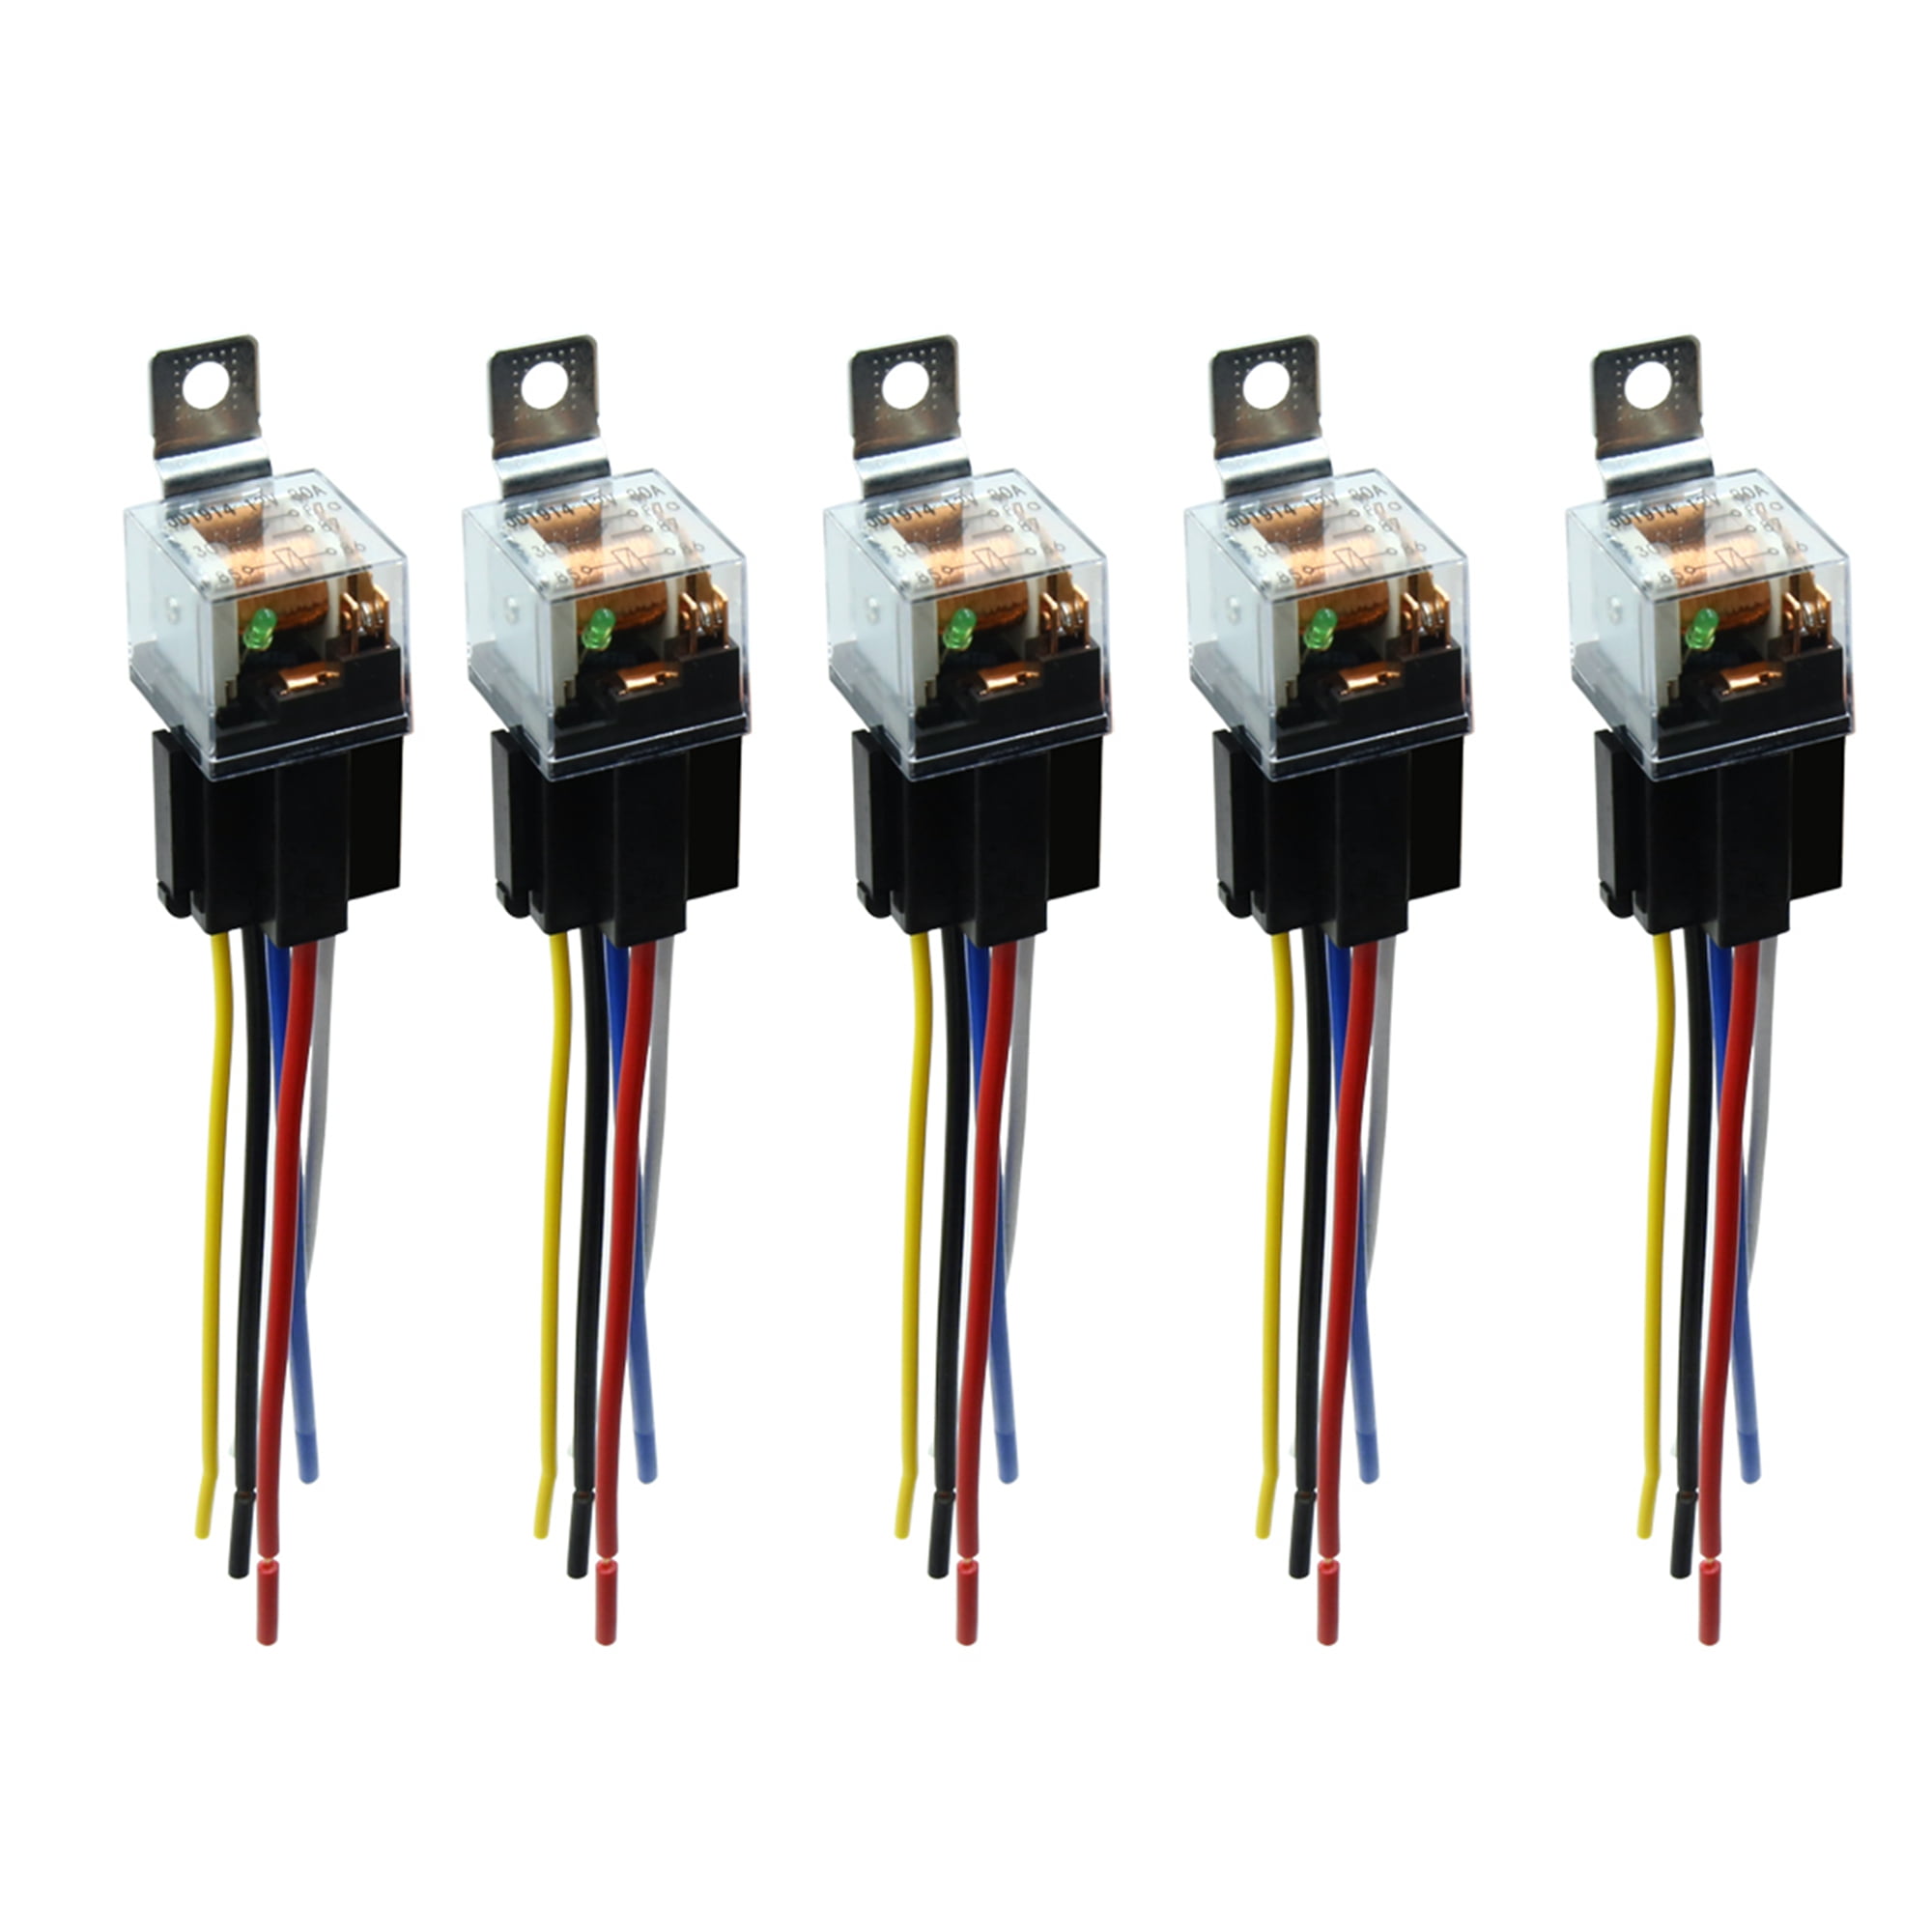 5pcs  5-Pin SPDT Automotive Relays with Harness Waterproof for Car 